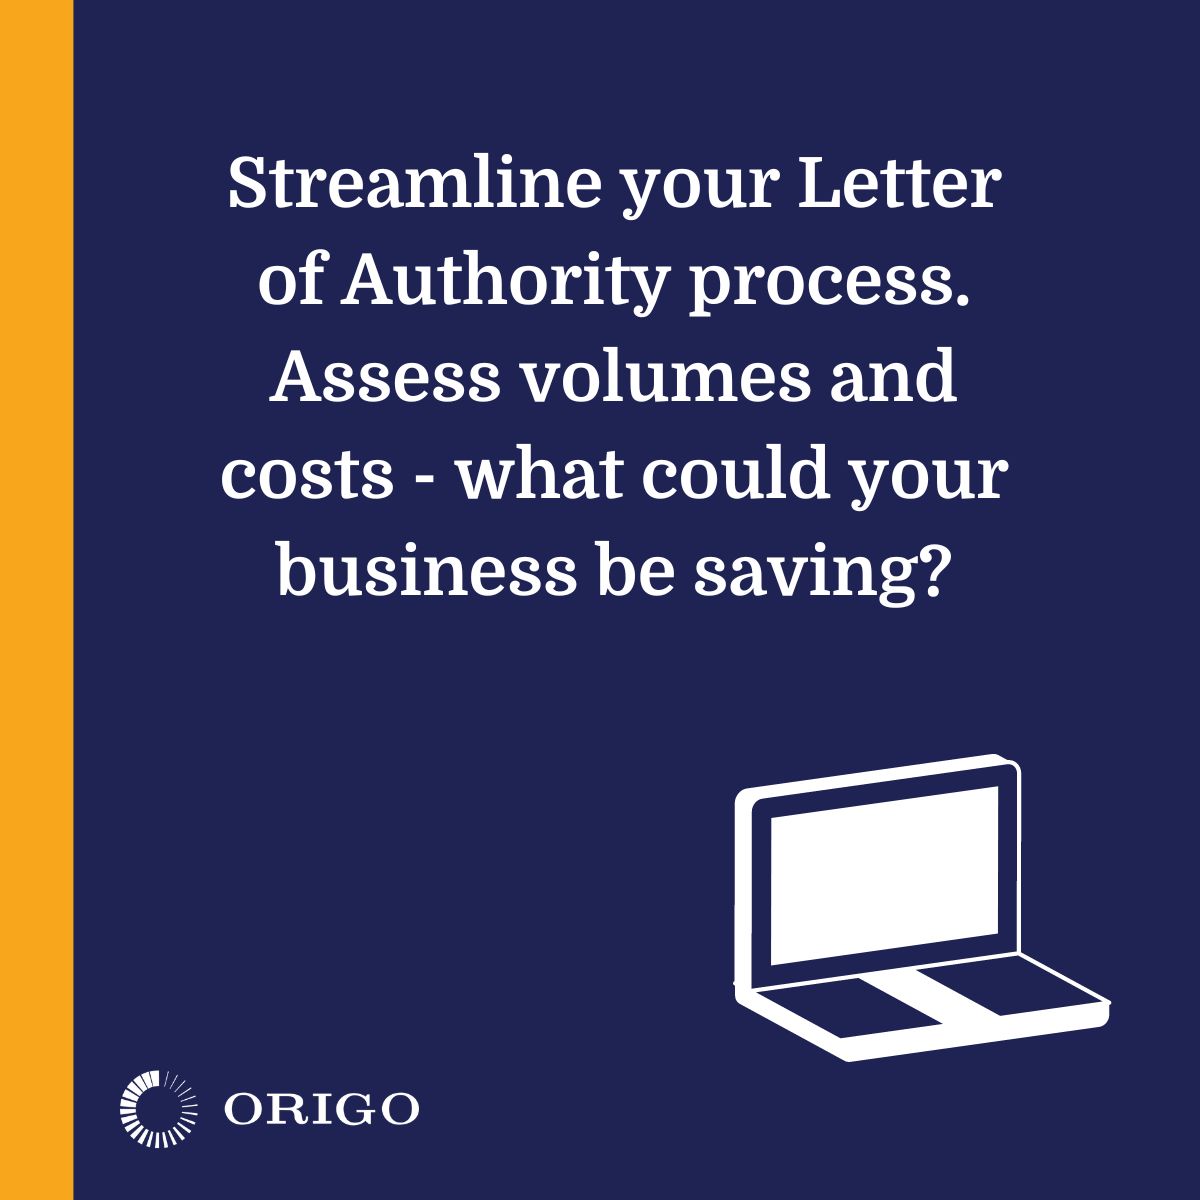 🚀 Let's make Letter of Authority (LoA) effortless. Consider: Your incoming LoA volumes and costs to process them, using your current method. Empower your process with Unipass Letter of Authority #DigitalTransformation #EfficiencyBoost

For more info: eu1.hubs.ly/H08CTz90